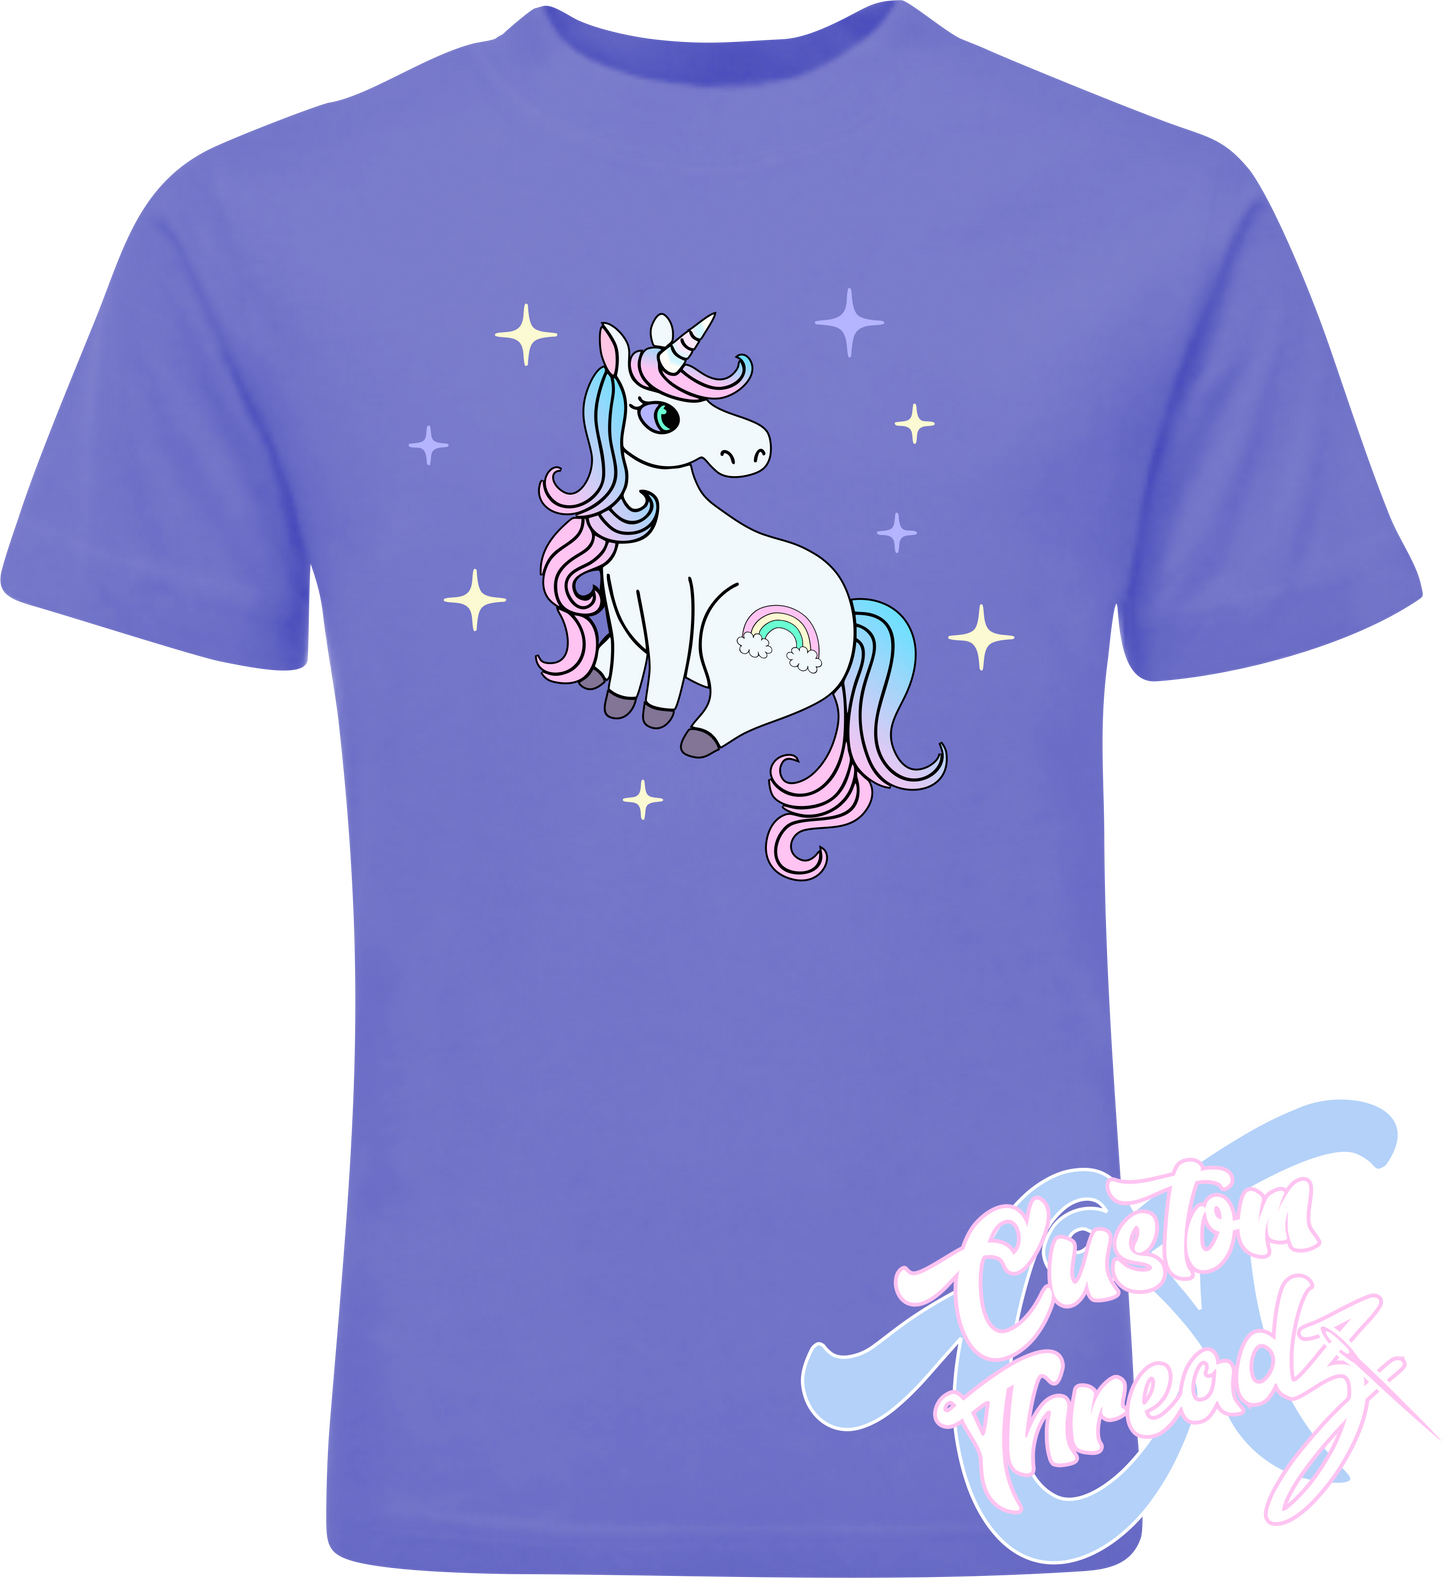 violet tee with cute rainbow unicorn DTG printed design